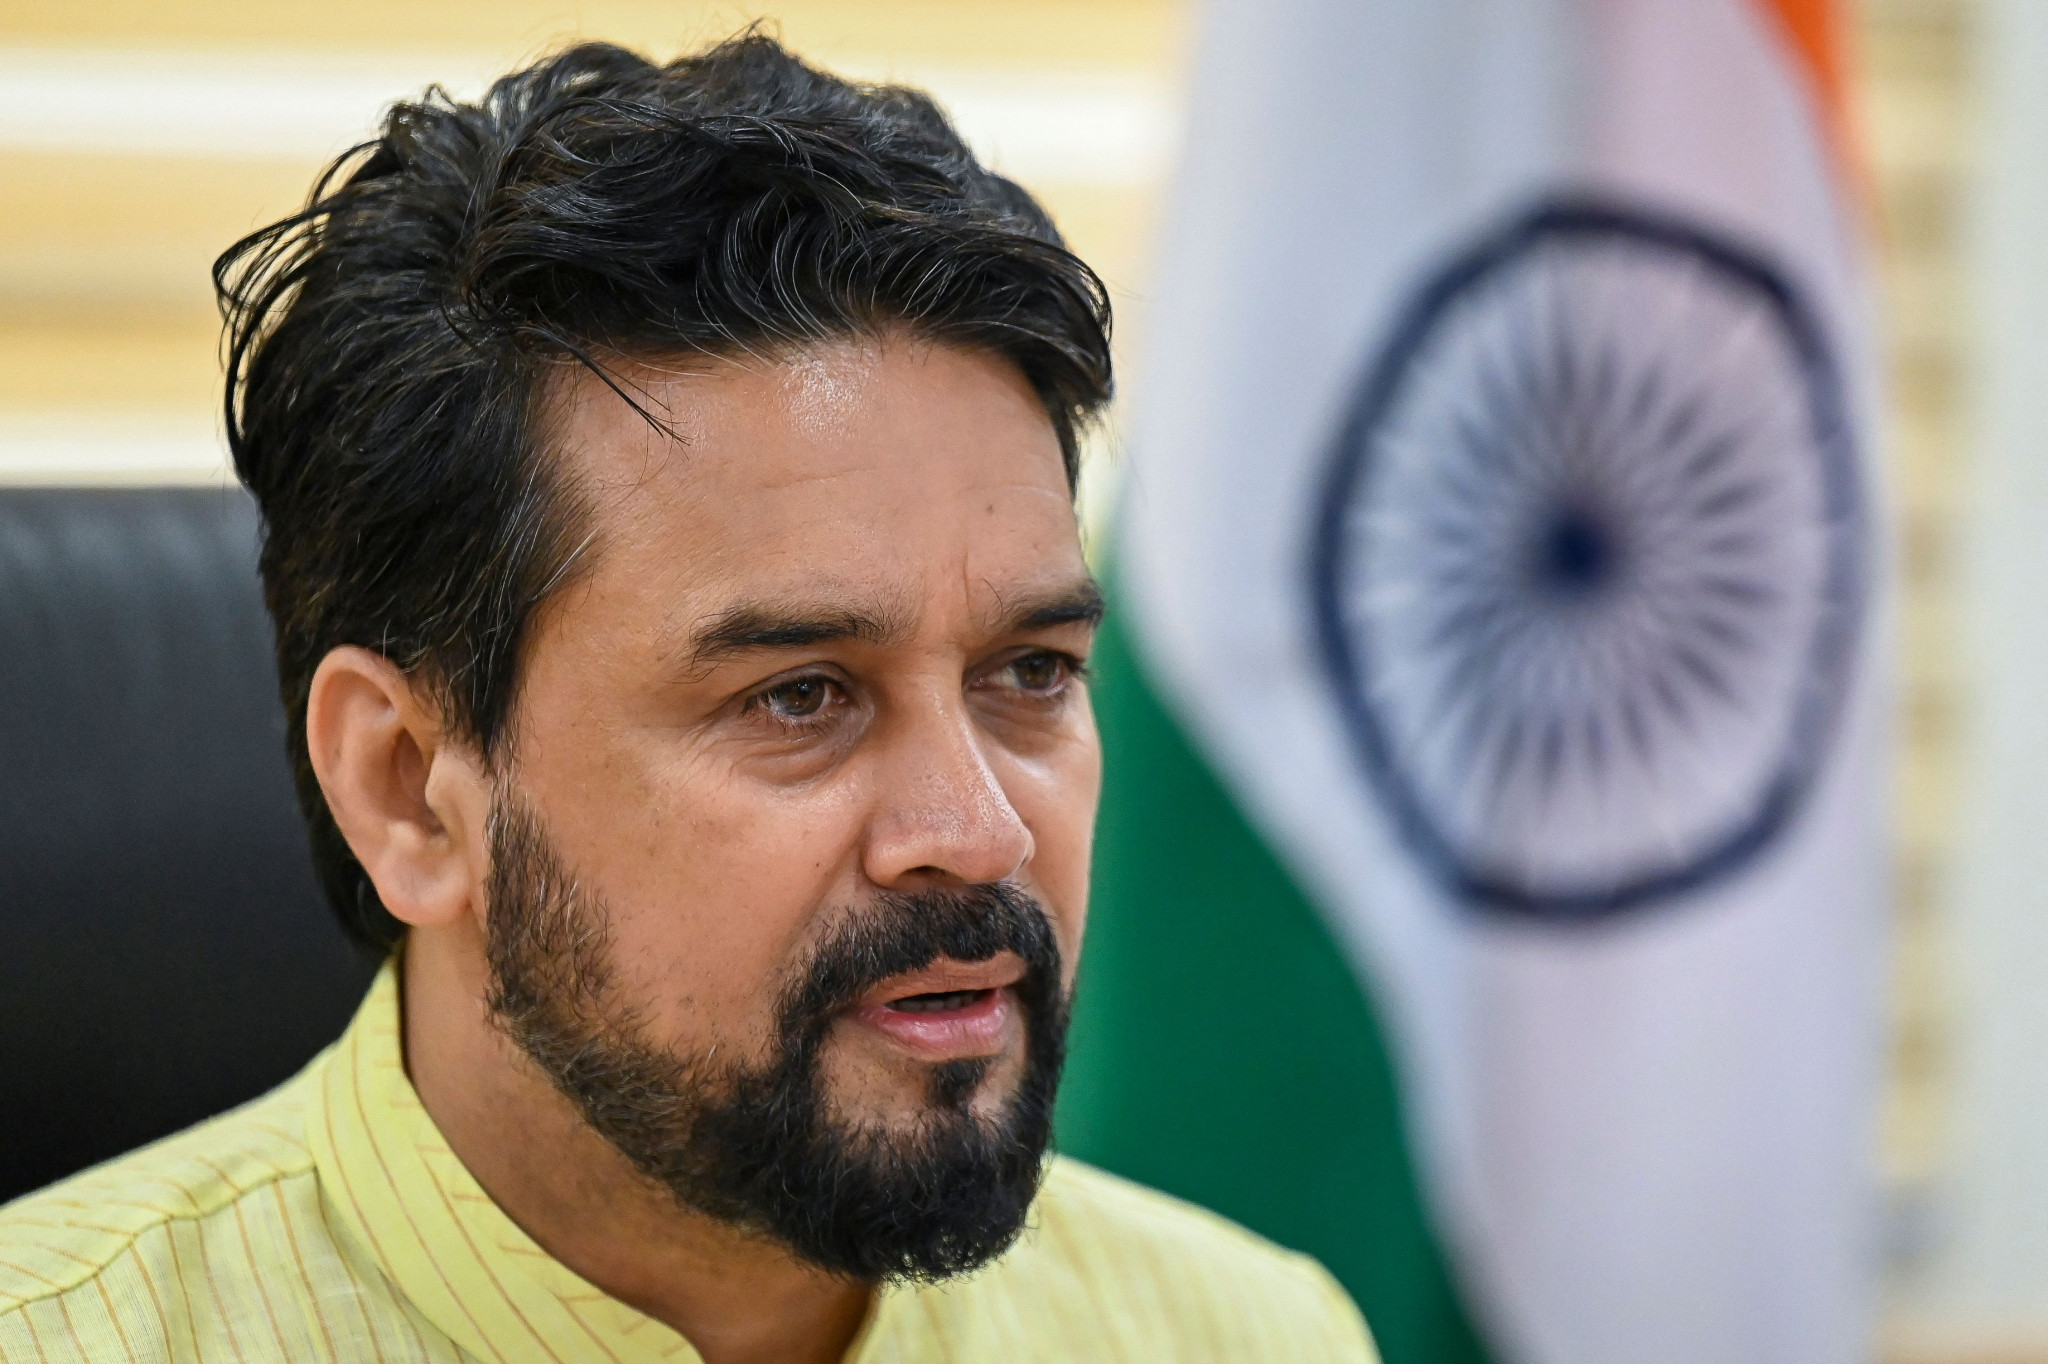 Indian Minister of Youth Affairs and Sports Anurag Thakur requested the removal of Singh as WFI President while an investigation takes place ©Getty Images